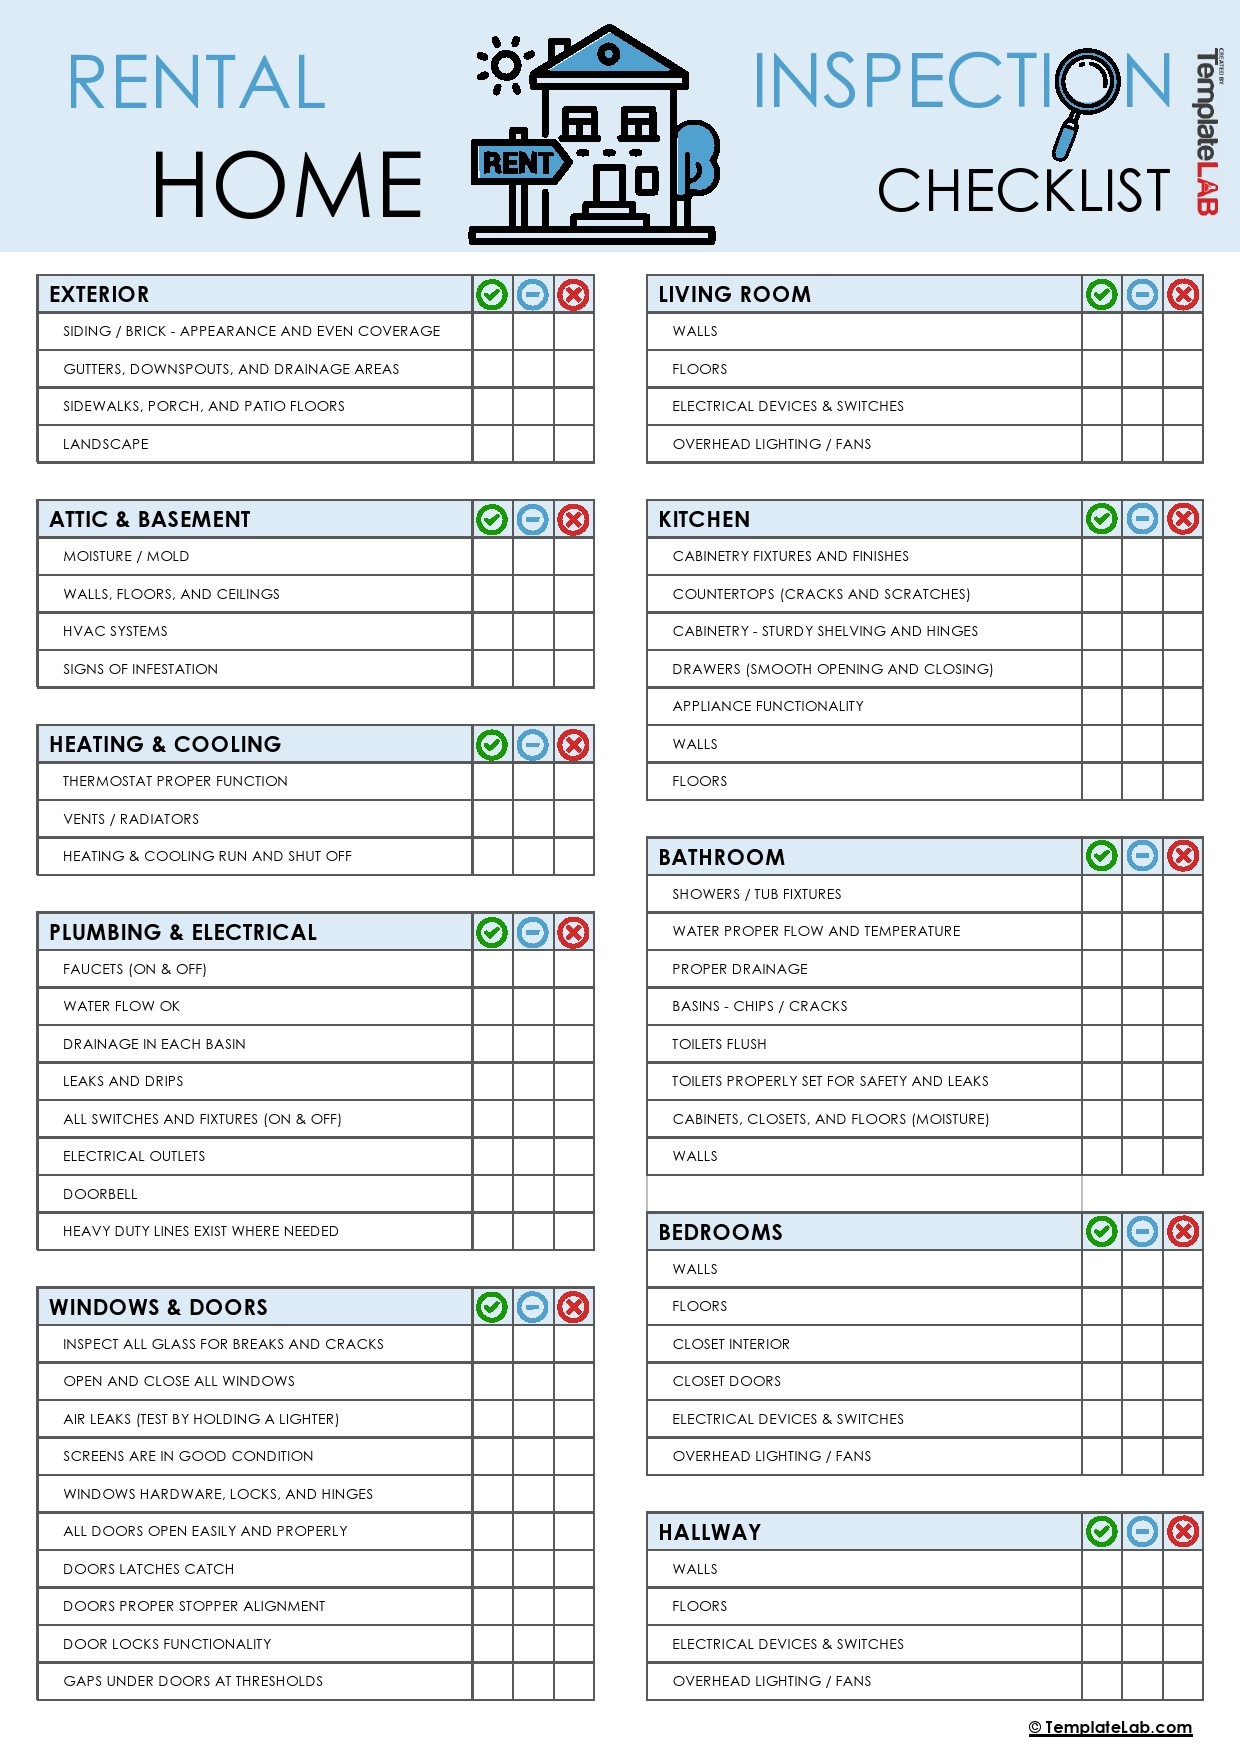 printable-home-inspection-checklist-form-printable-forms-free-online